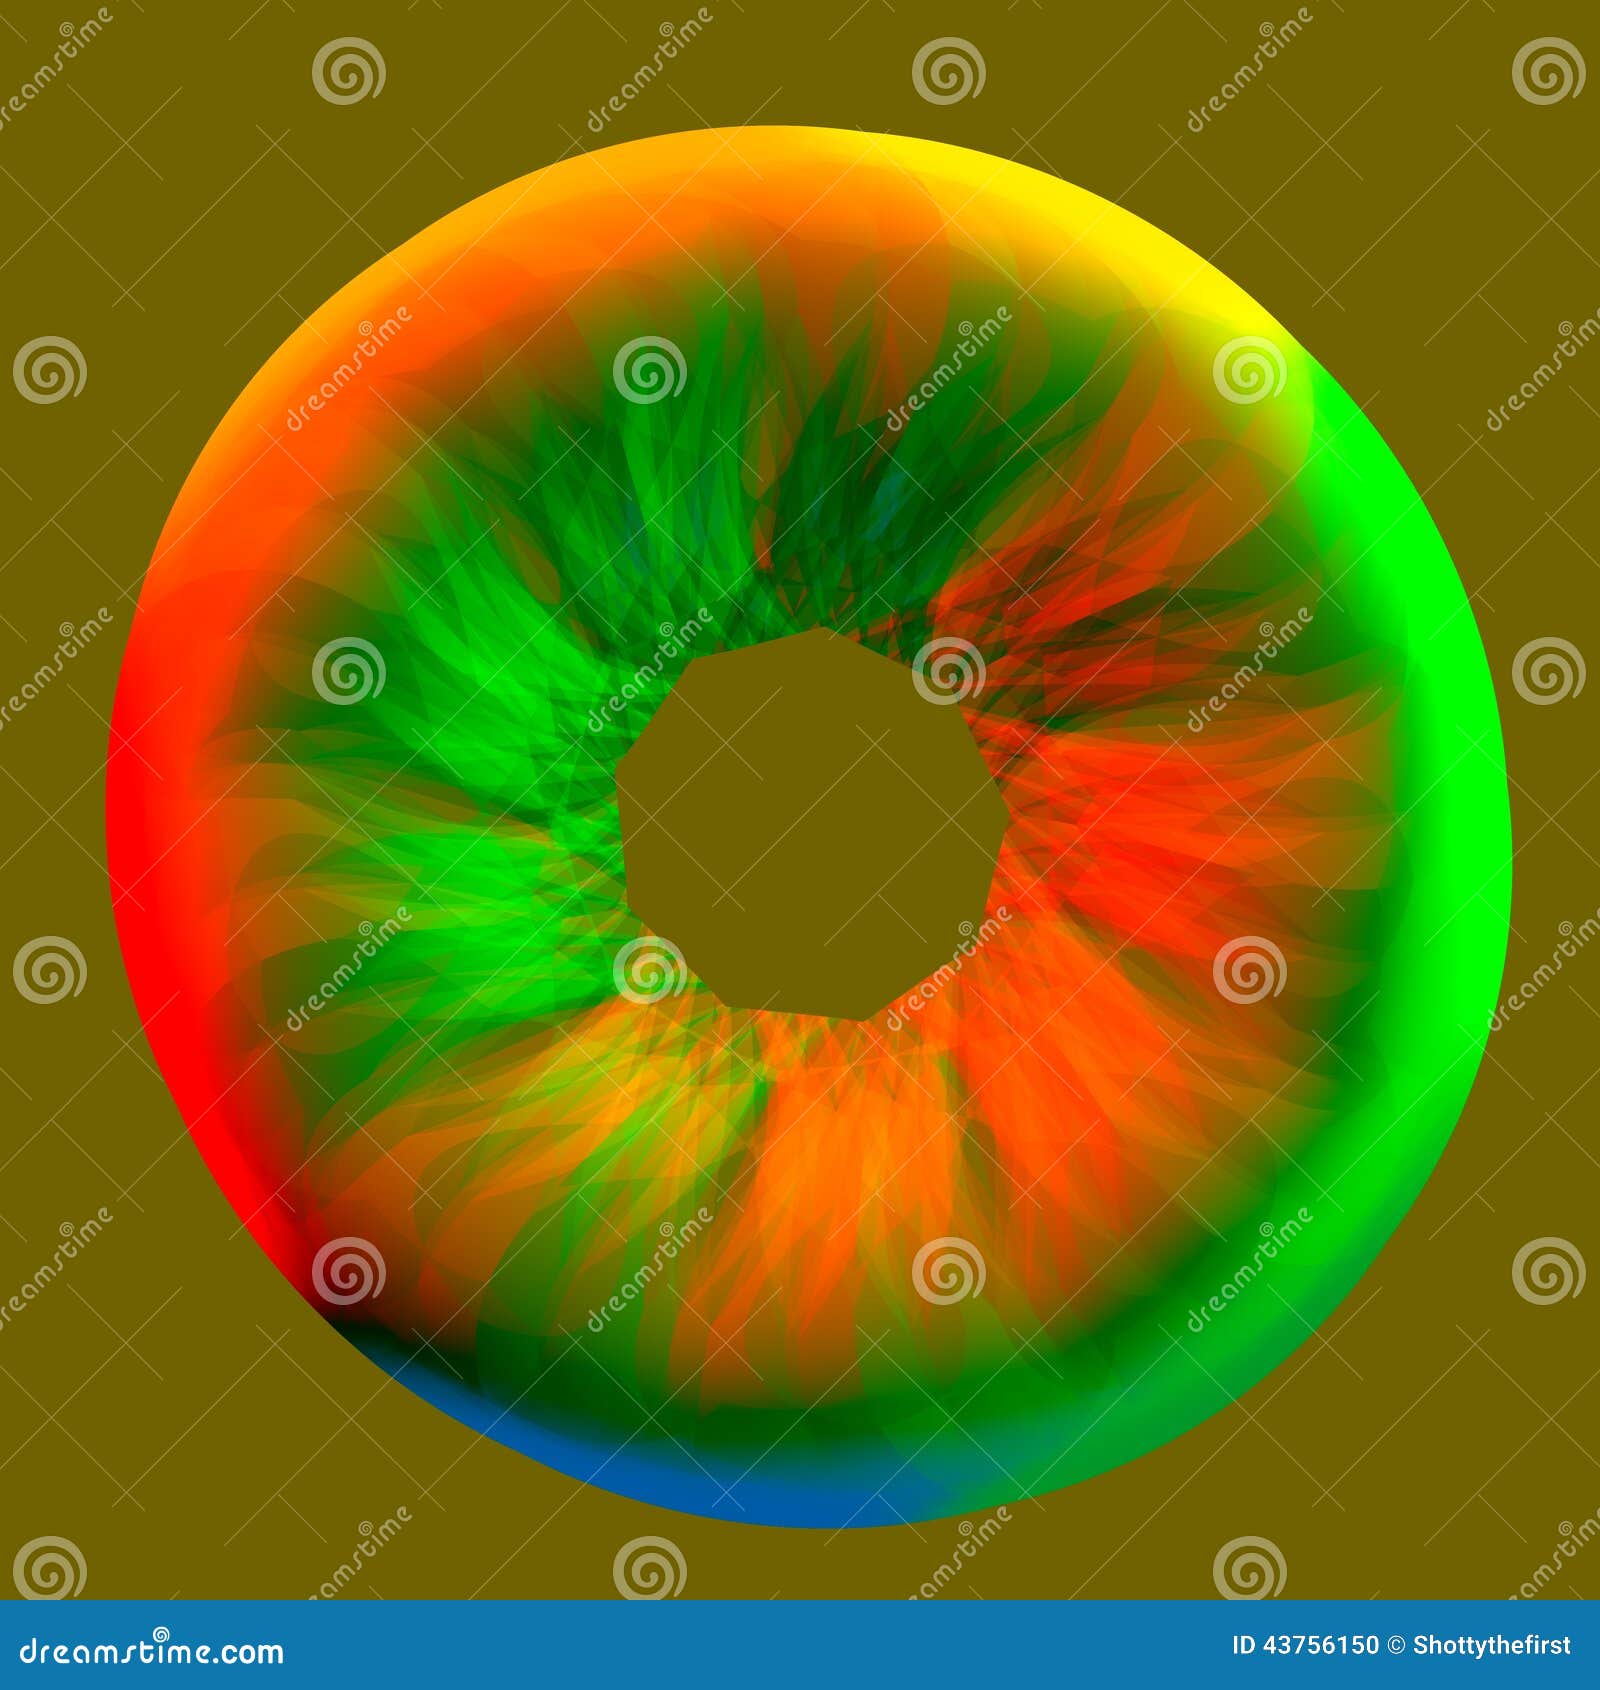 abstract colorful retina - 3d 